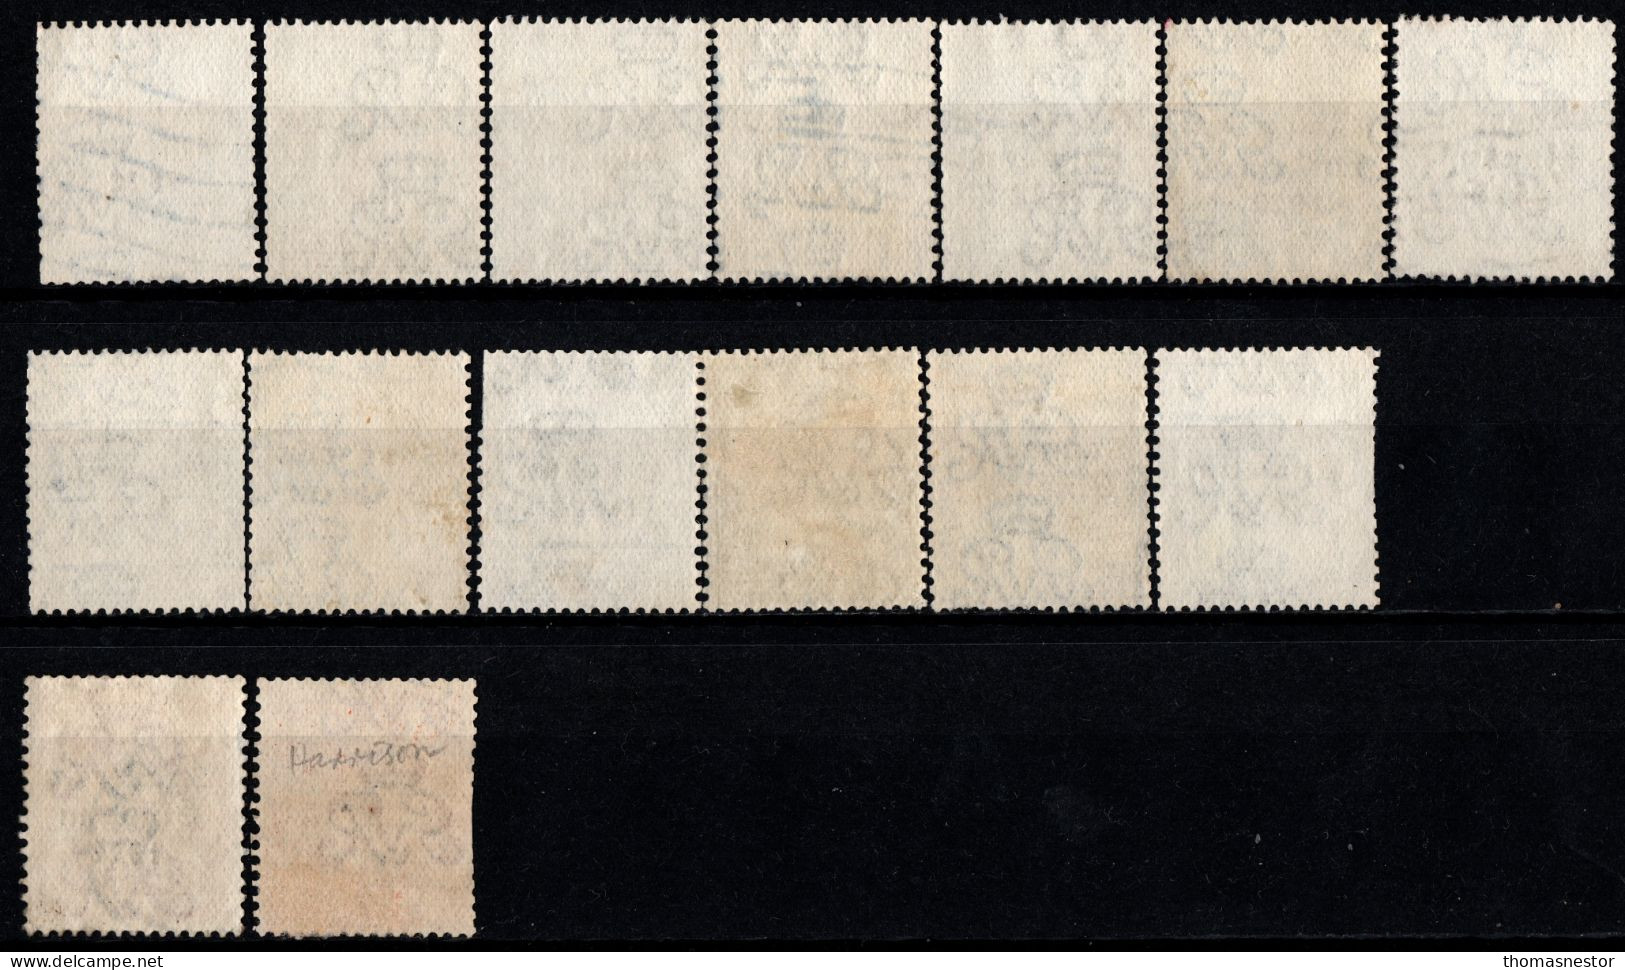 1923 Harrison 3 Line Coil In Blue Black Ink, With Fiscal Cancellation, Parcel Post And Commercial Cancel 15 In Total - Used Stamps